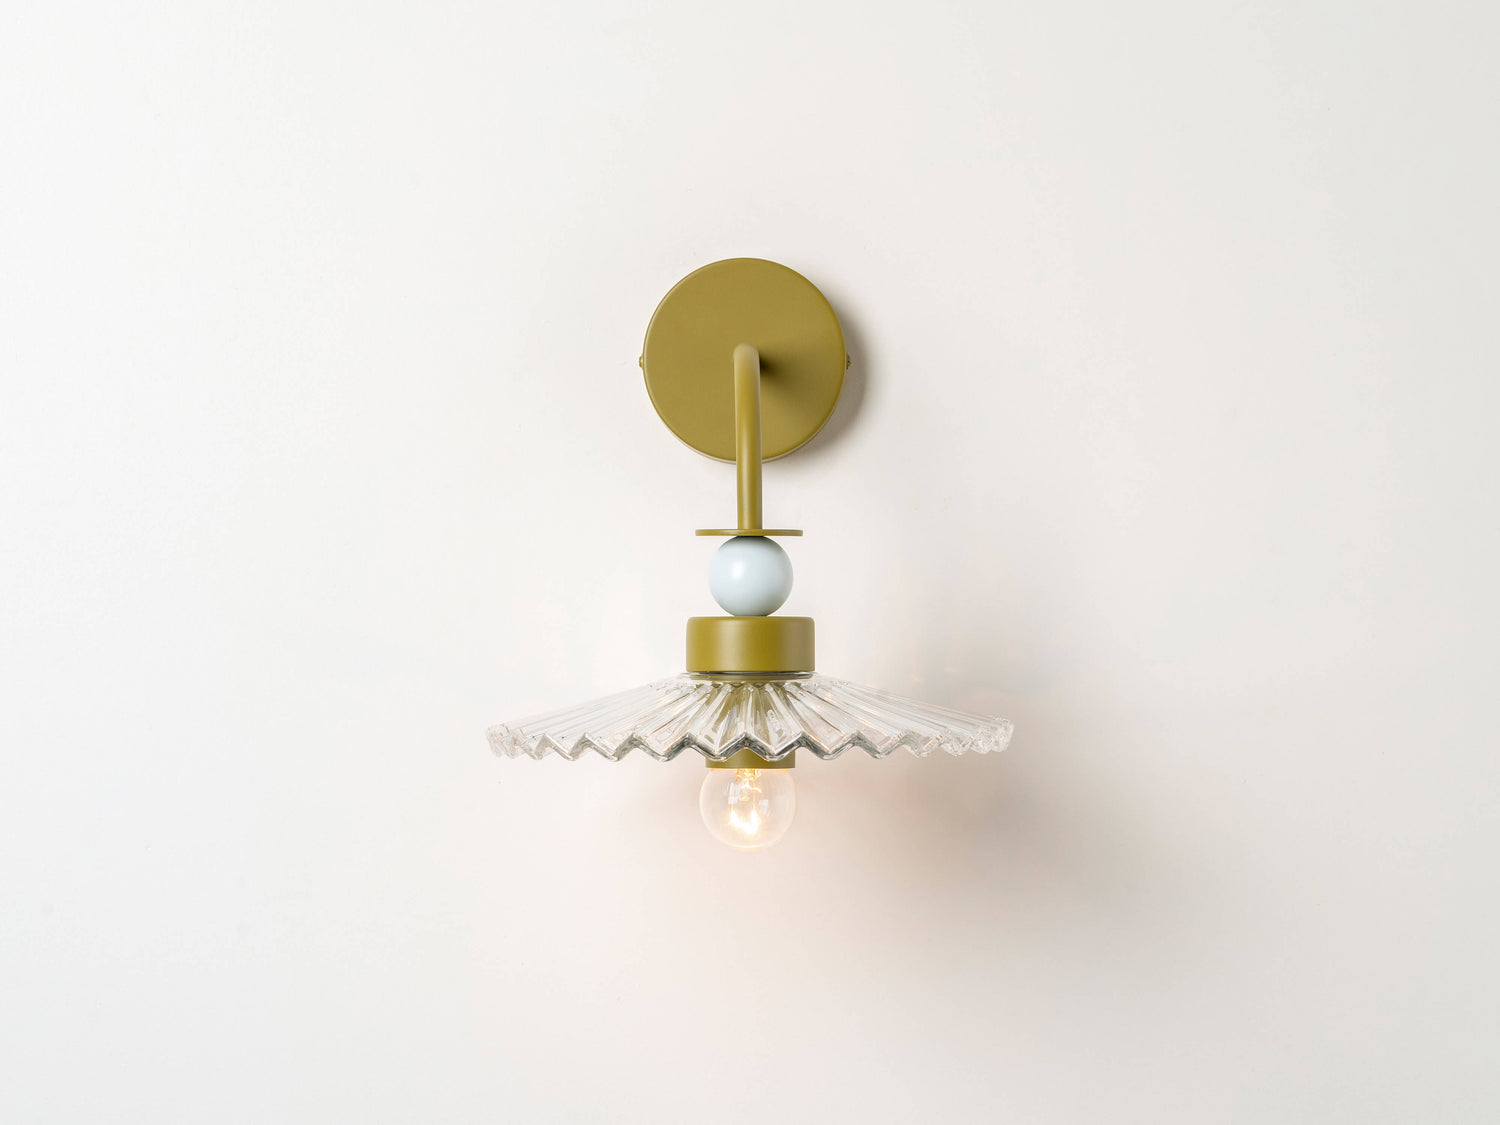 A fluted, ribbed glass shade is stacked with moss green and pale blue painted metal disk and ball elements, hanging from a wall fixture. Light is on.